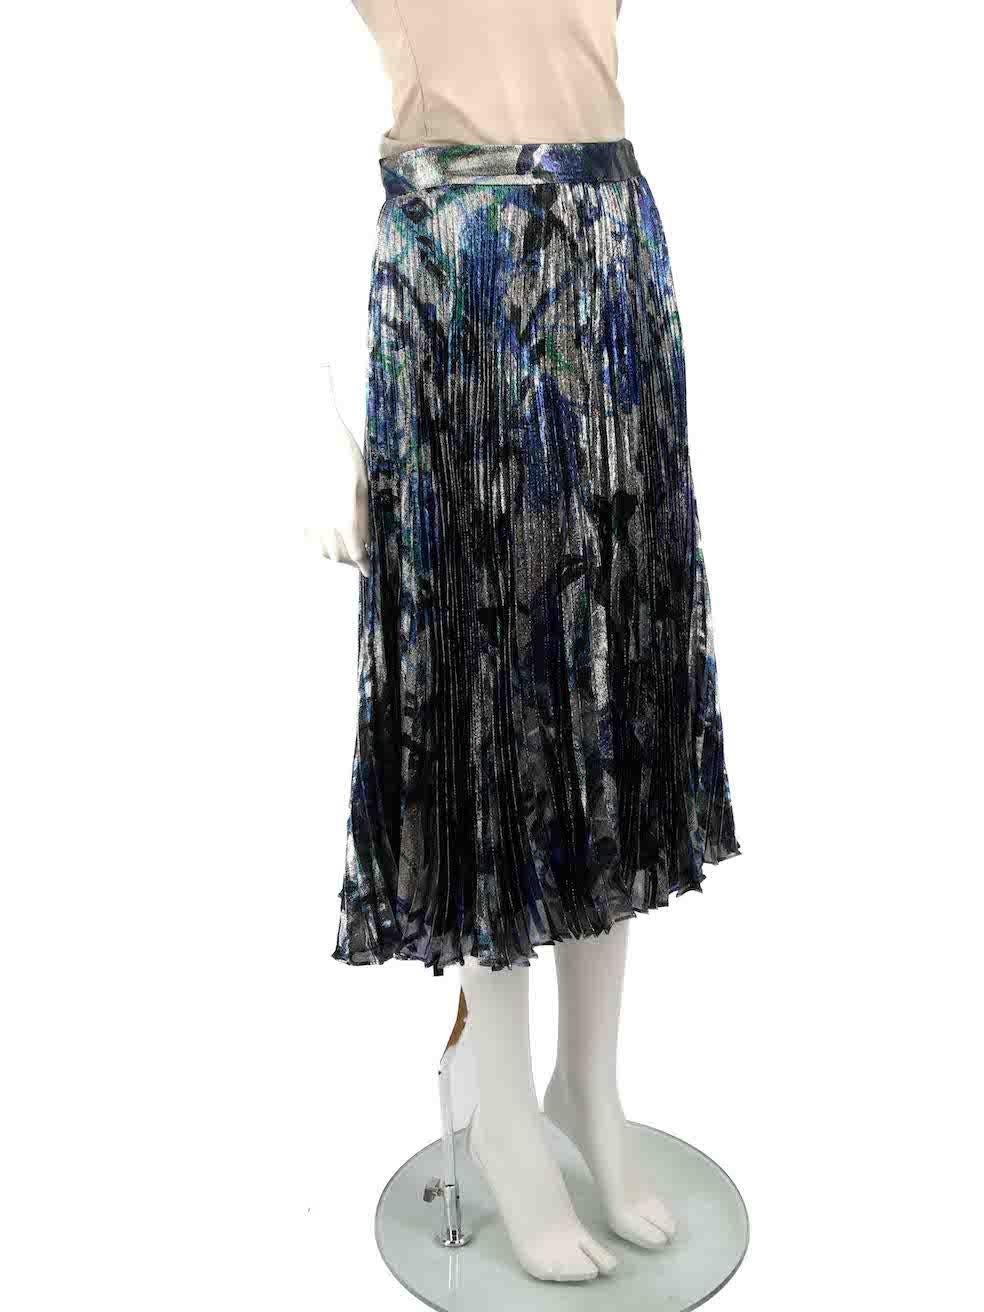 CONDITION is Very good. Minimal wear to skirt is evident. Minimal wear to the front and back with pulls to the weave on this used Christopher Kane designer resale item.
 
 Details
 Multicolour- silver, black, blue, green
 Silk
 Skirt
 Floral print
